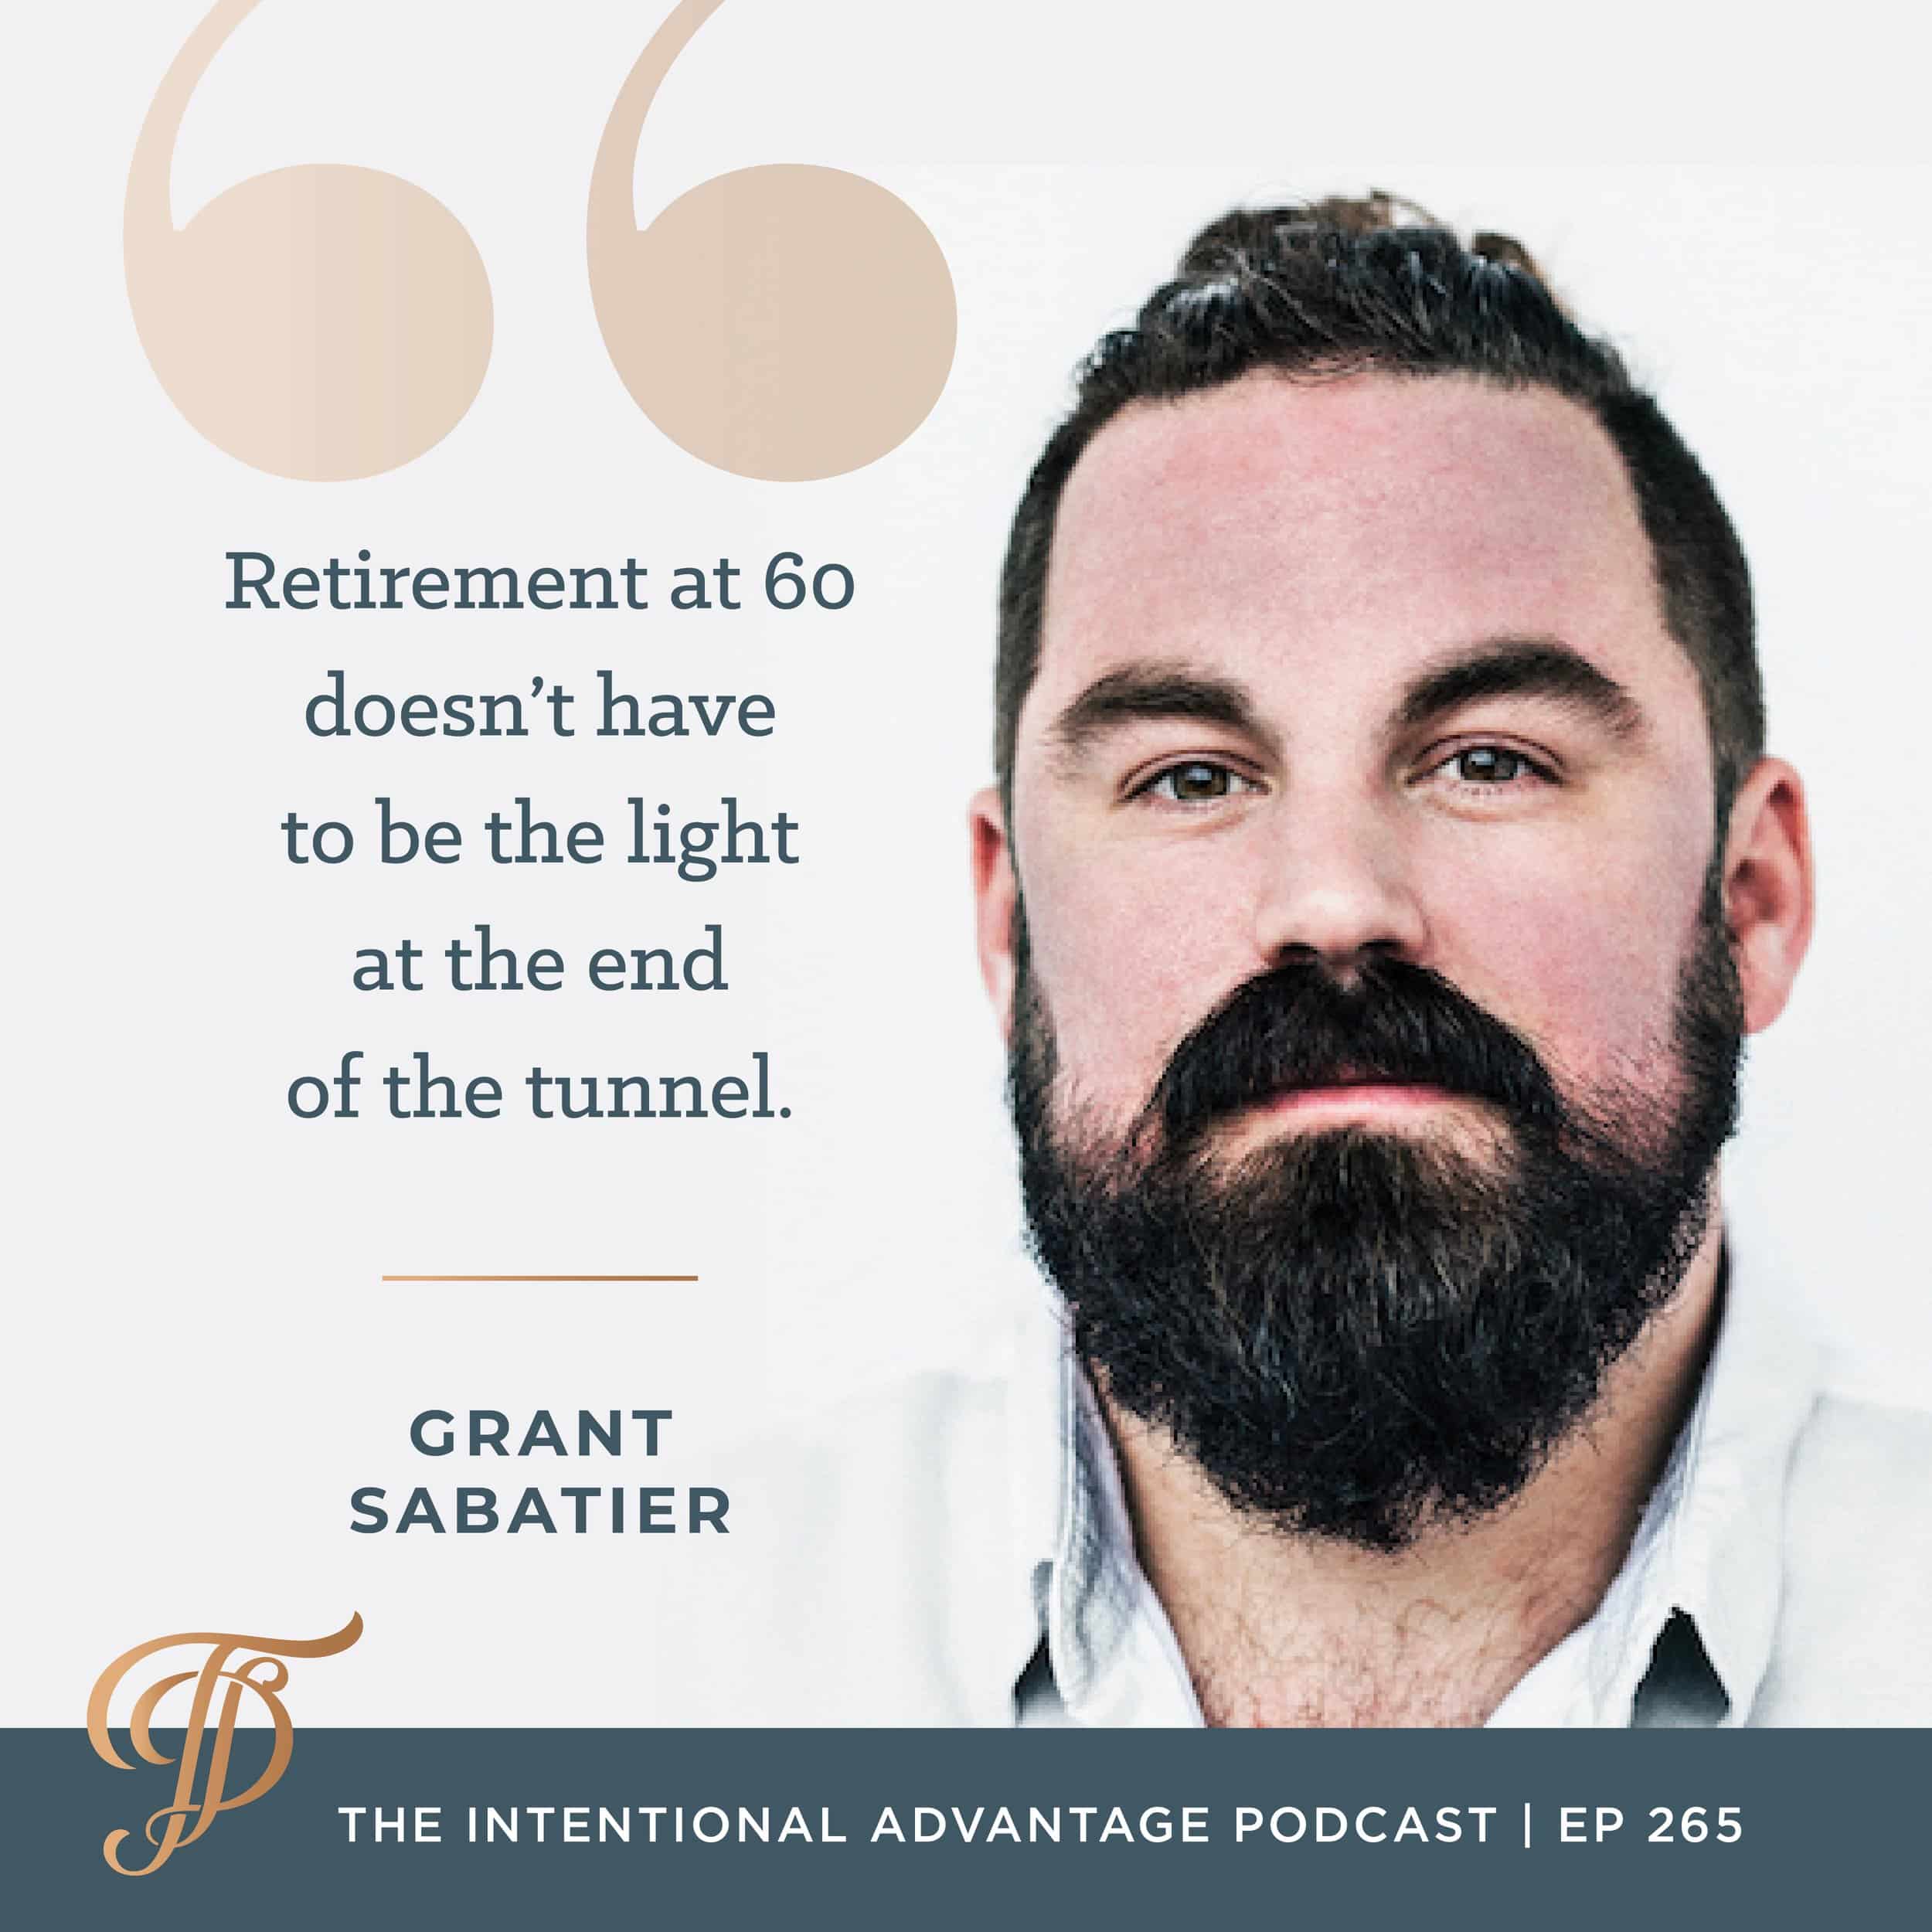 Grant Sabatier, author of Financial Freedom, podcast interview on The Intentional Advantage